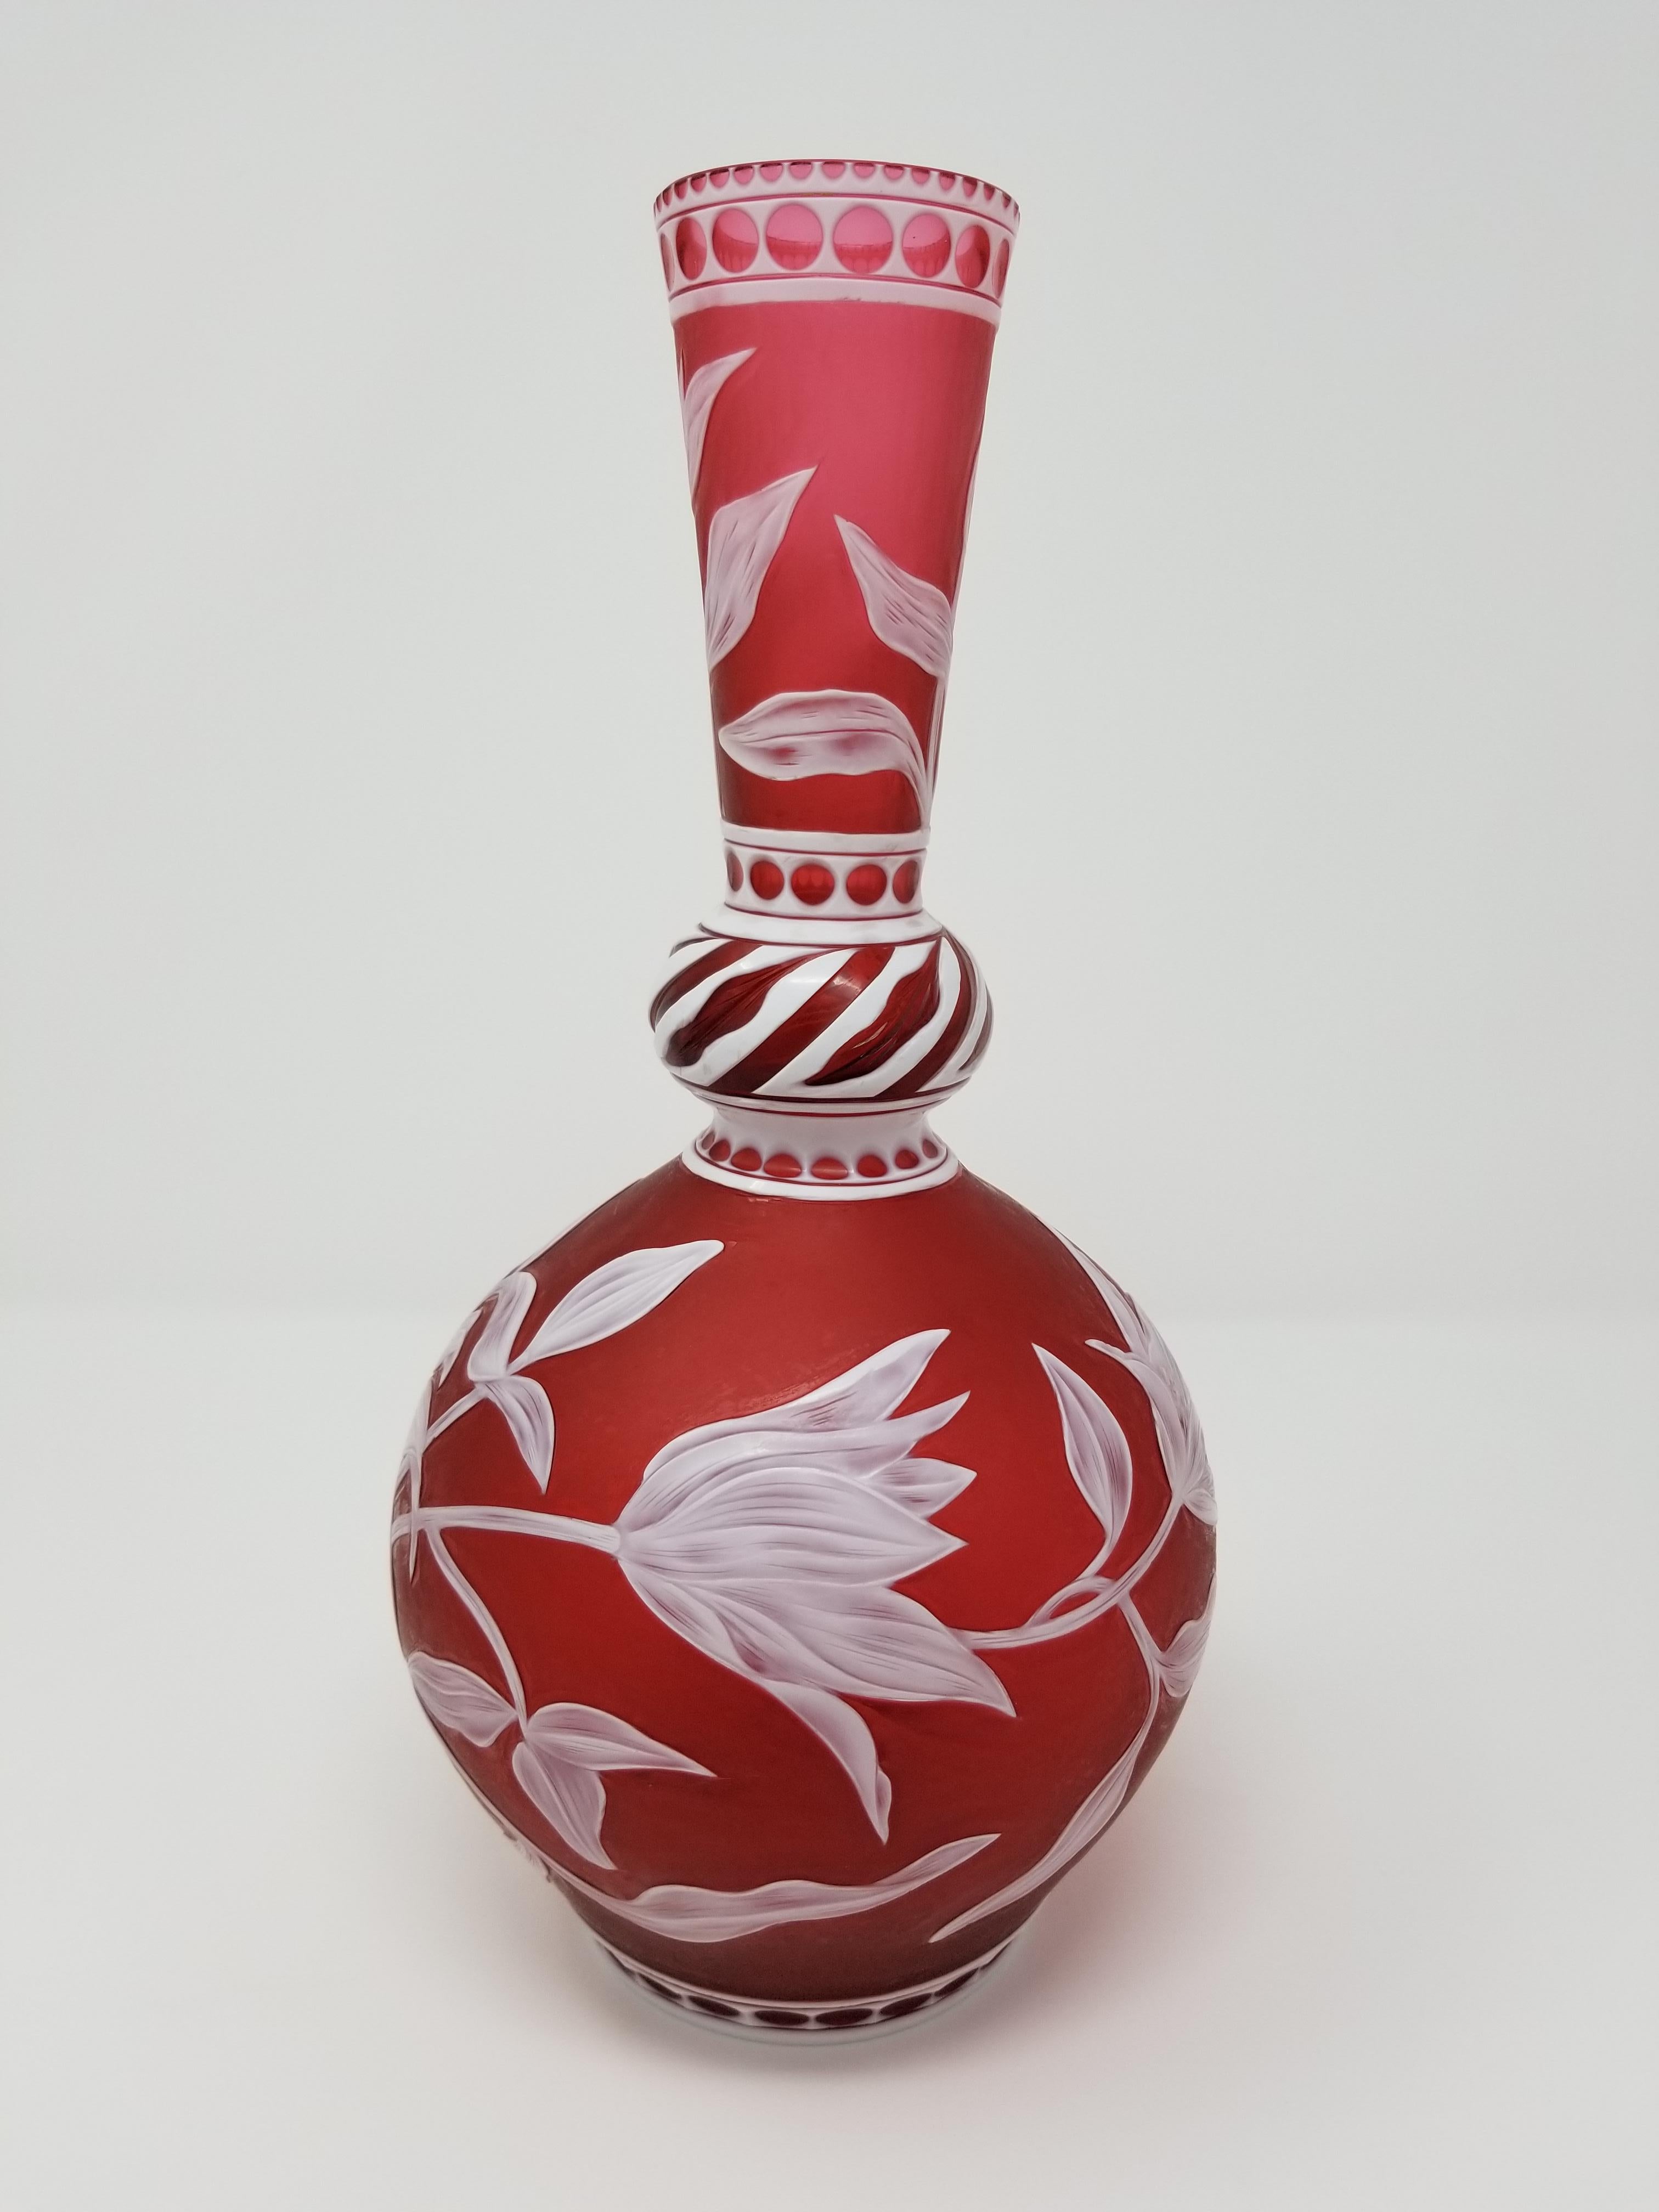 A beautiful English engraved Stevens & Williams red and white overlay cameo glass vase, hand carved, hand-engraved, and hand-etched by J. Millward, signed Stevens & Williams and J. Millward. The vase was created in baluster form with a long bottle